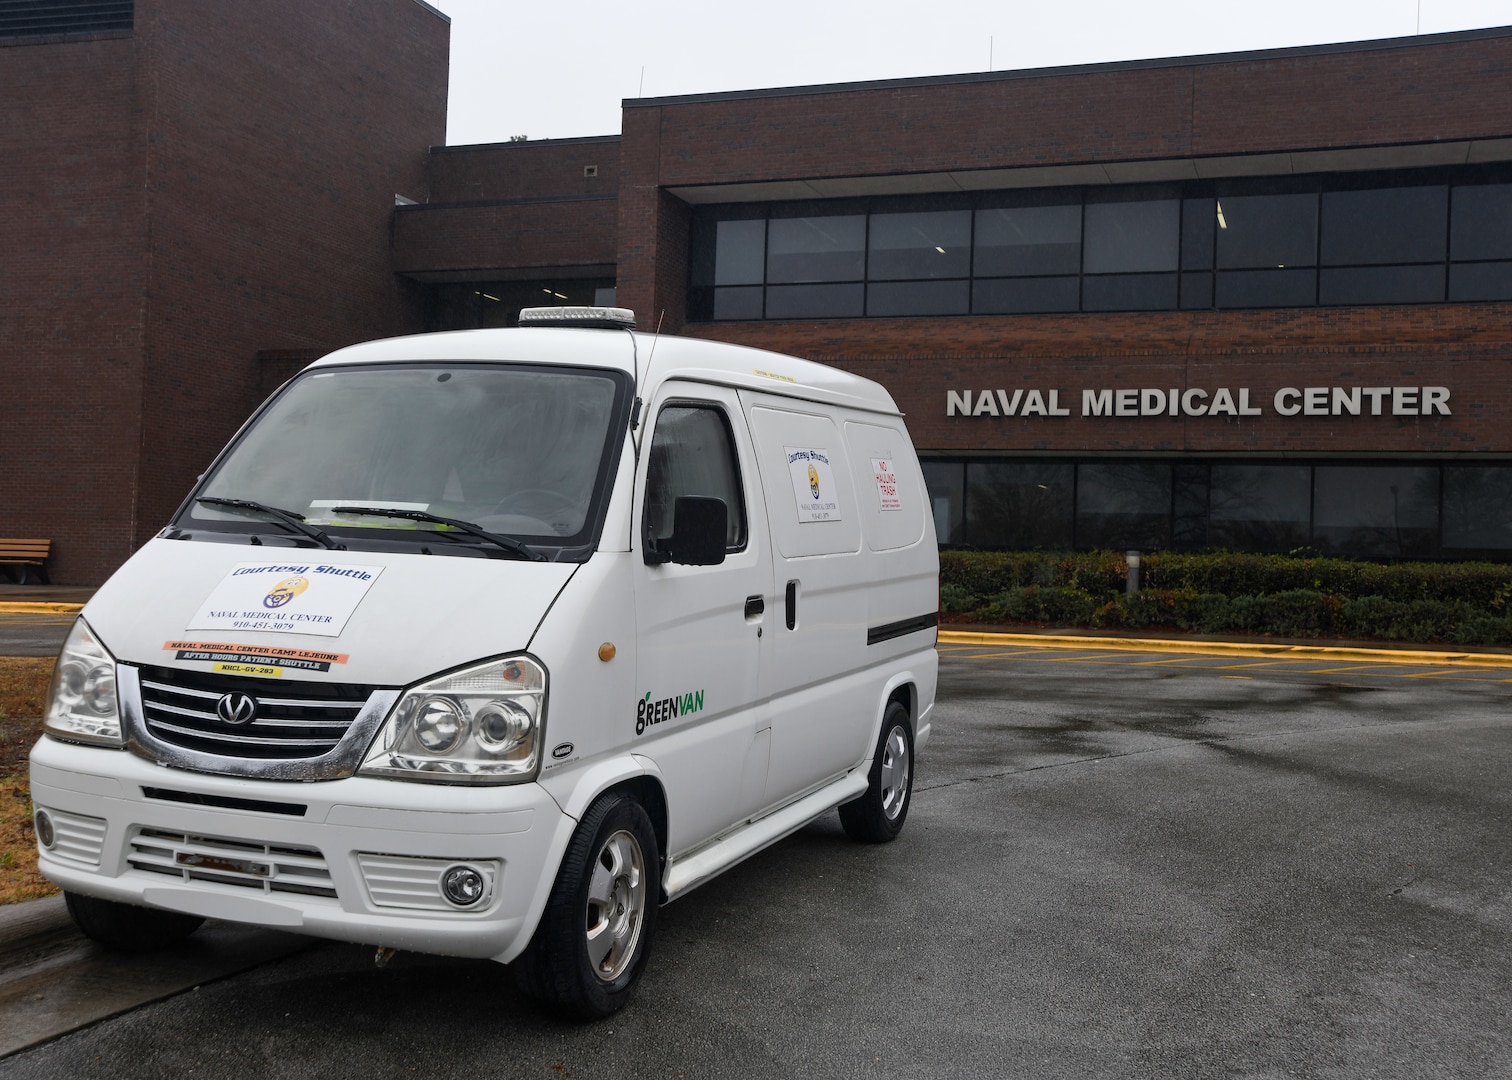 Naval Medical Center Camp Lejeune’s patient shuttle service, which transports patients from the parking lot and Medical Center, recently expanded services to 24 hours a day, seven days a week.